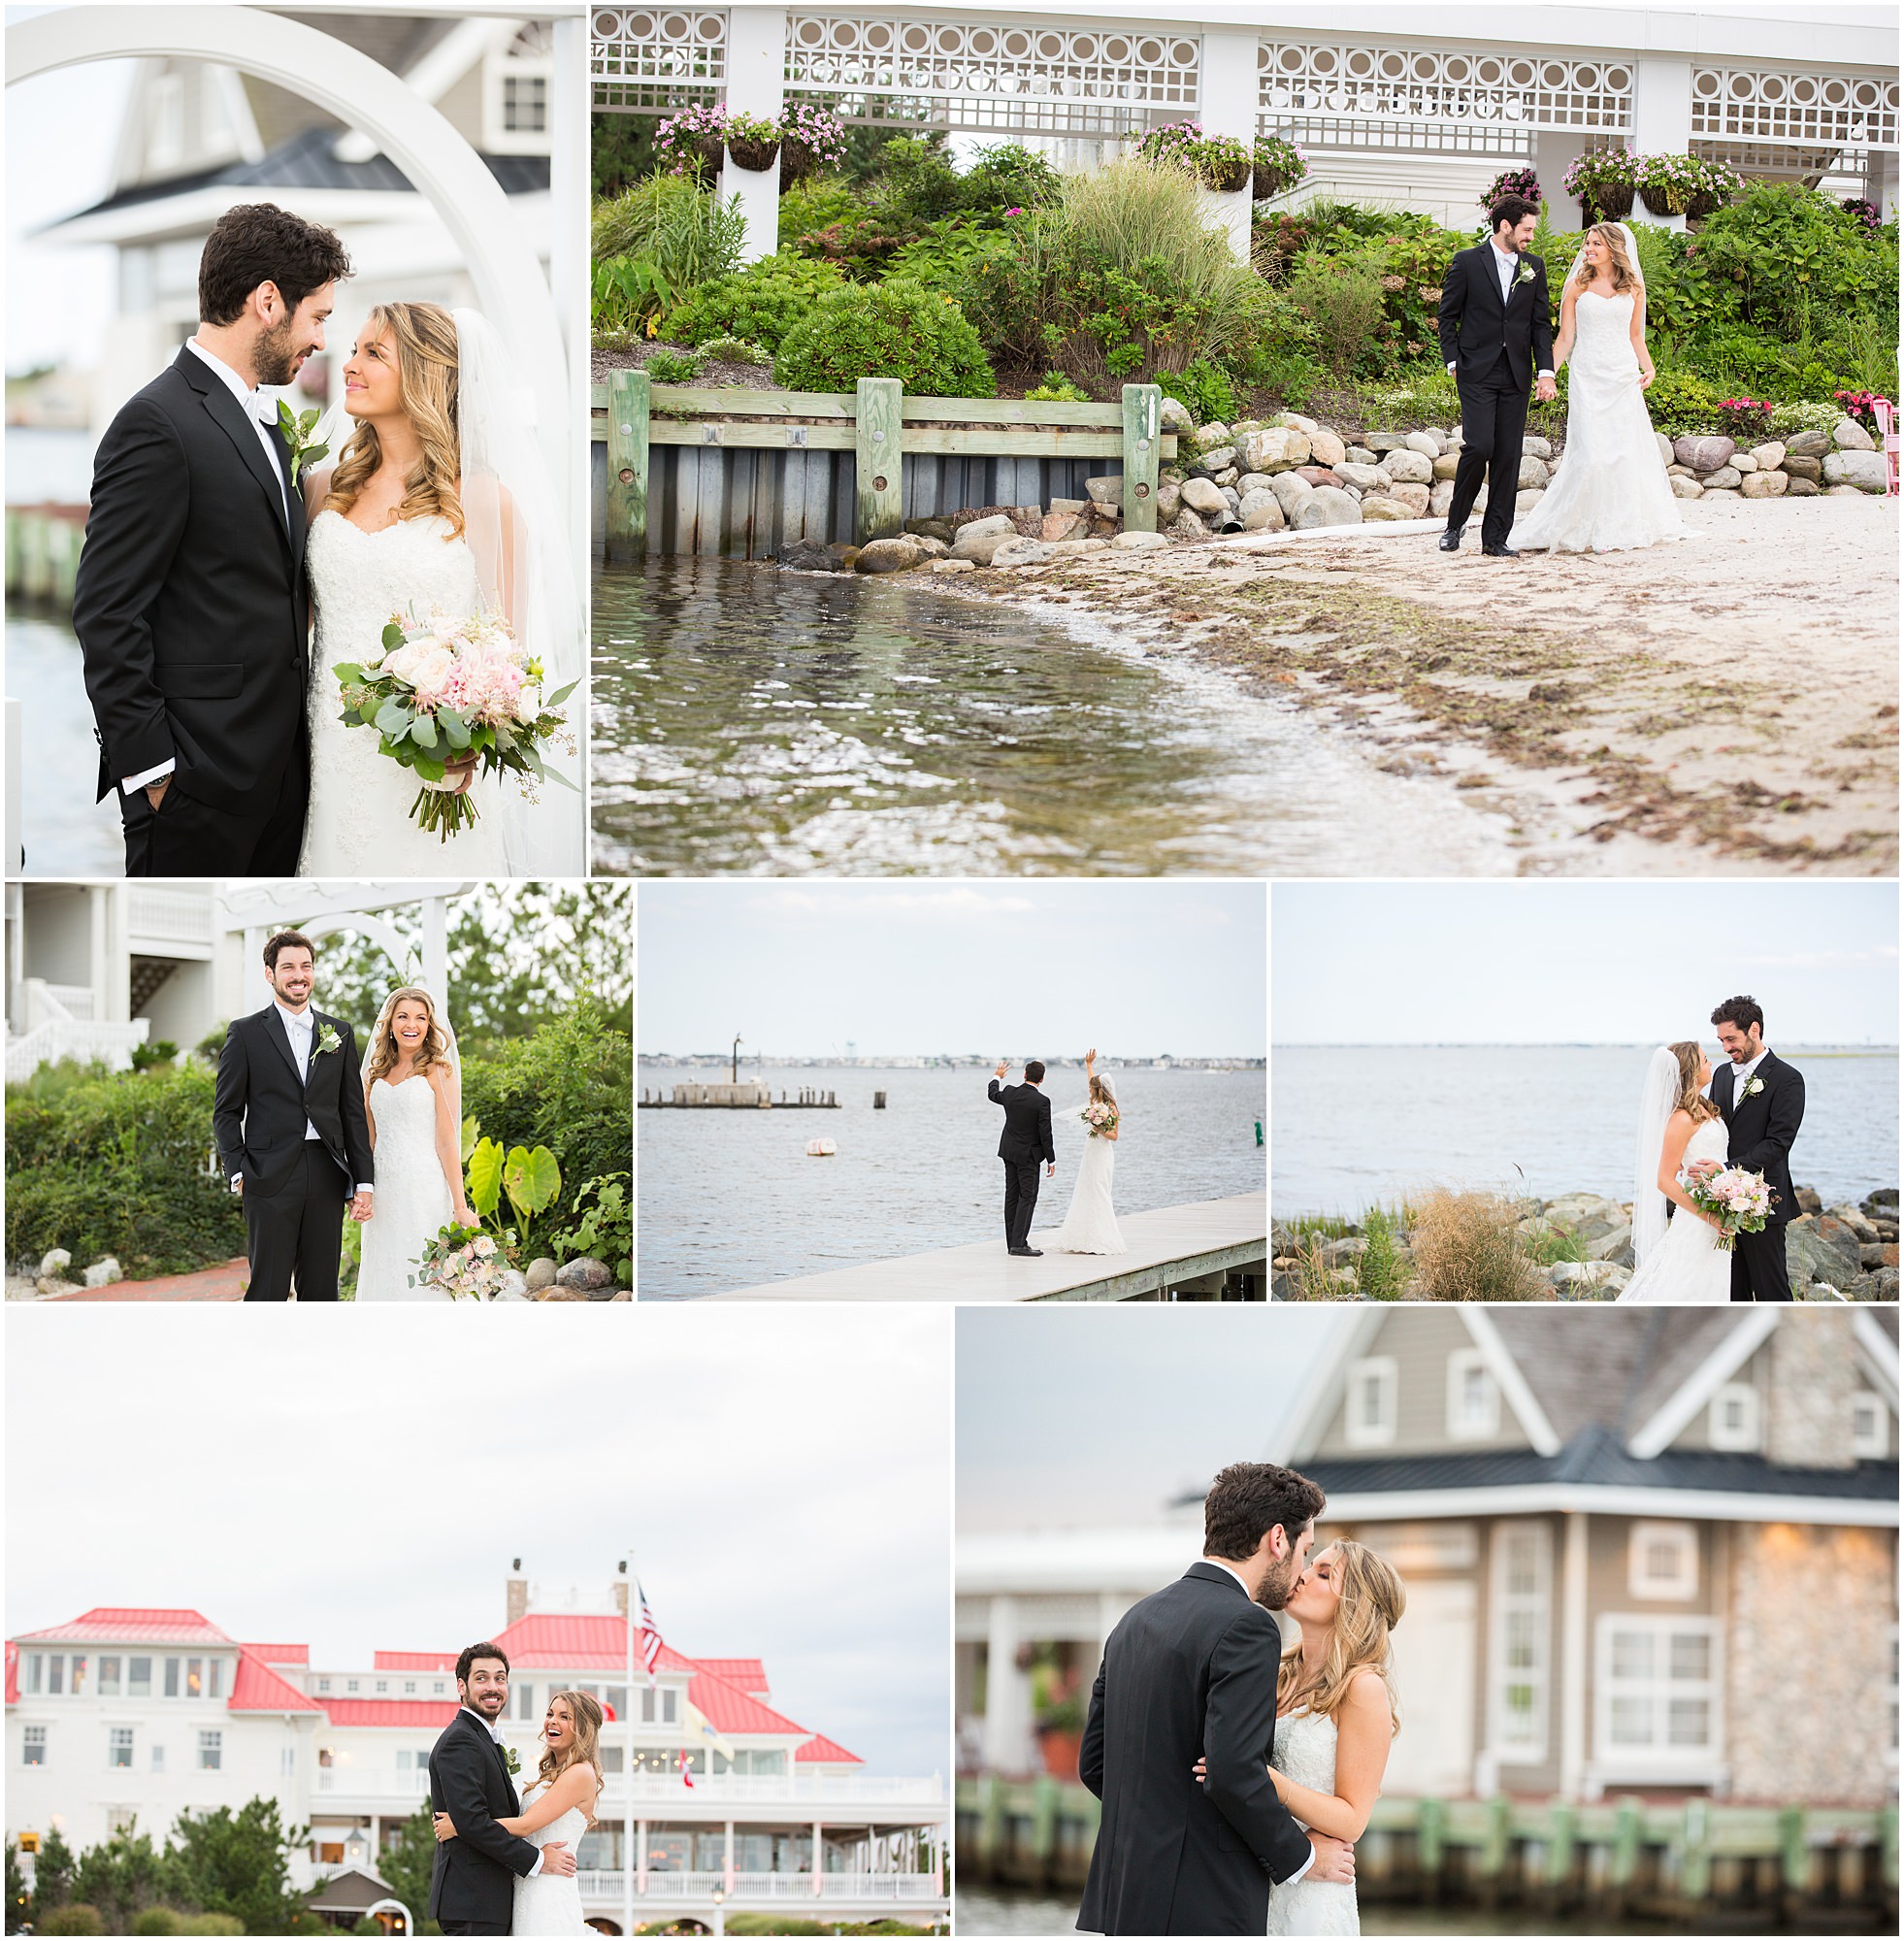 The grounds of Mallard Island Yacht Club is perfect for a variety of different options for portraits